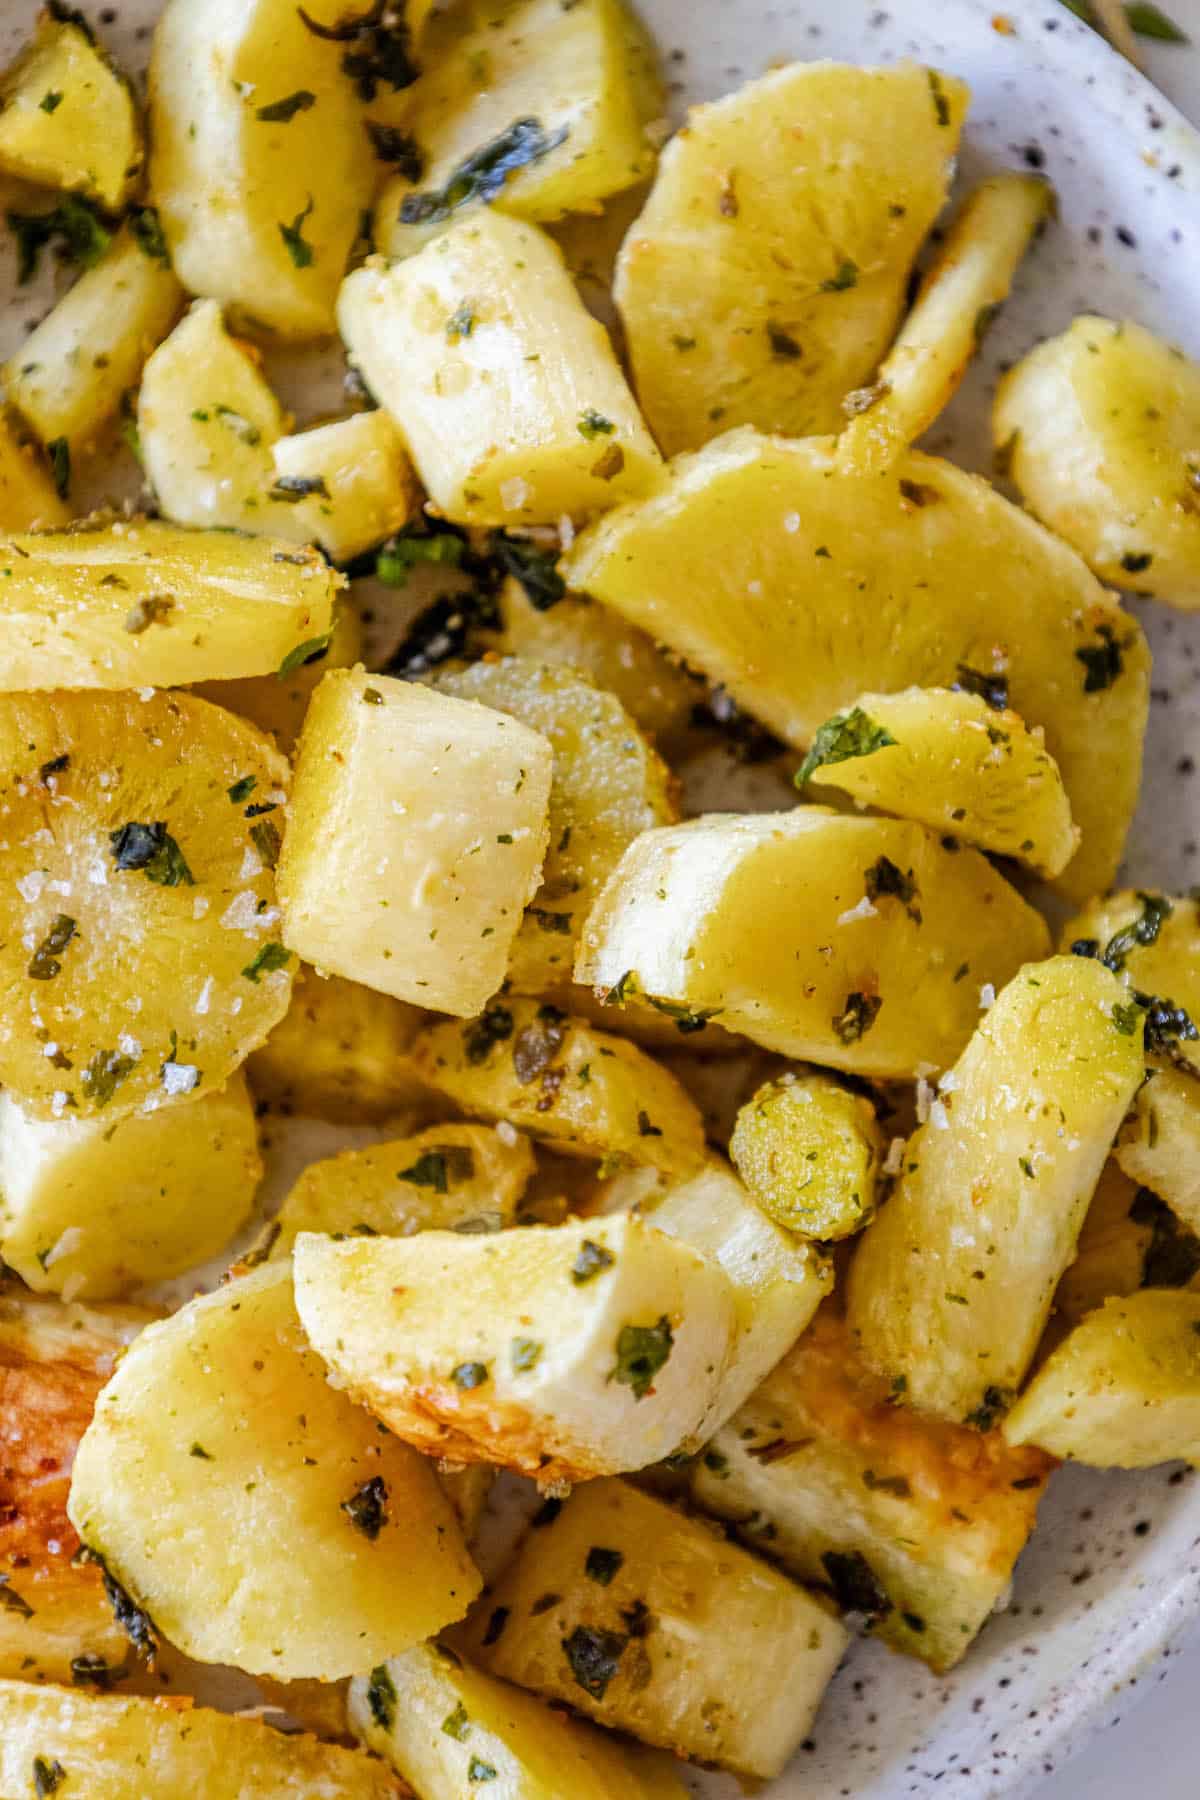 Roasted potatoes and parsnips on a plate with herbs.